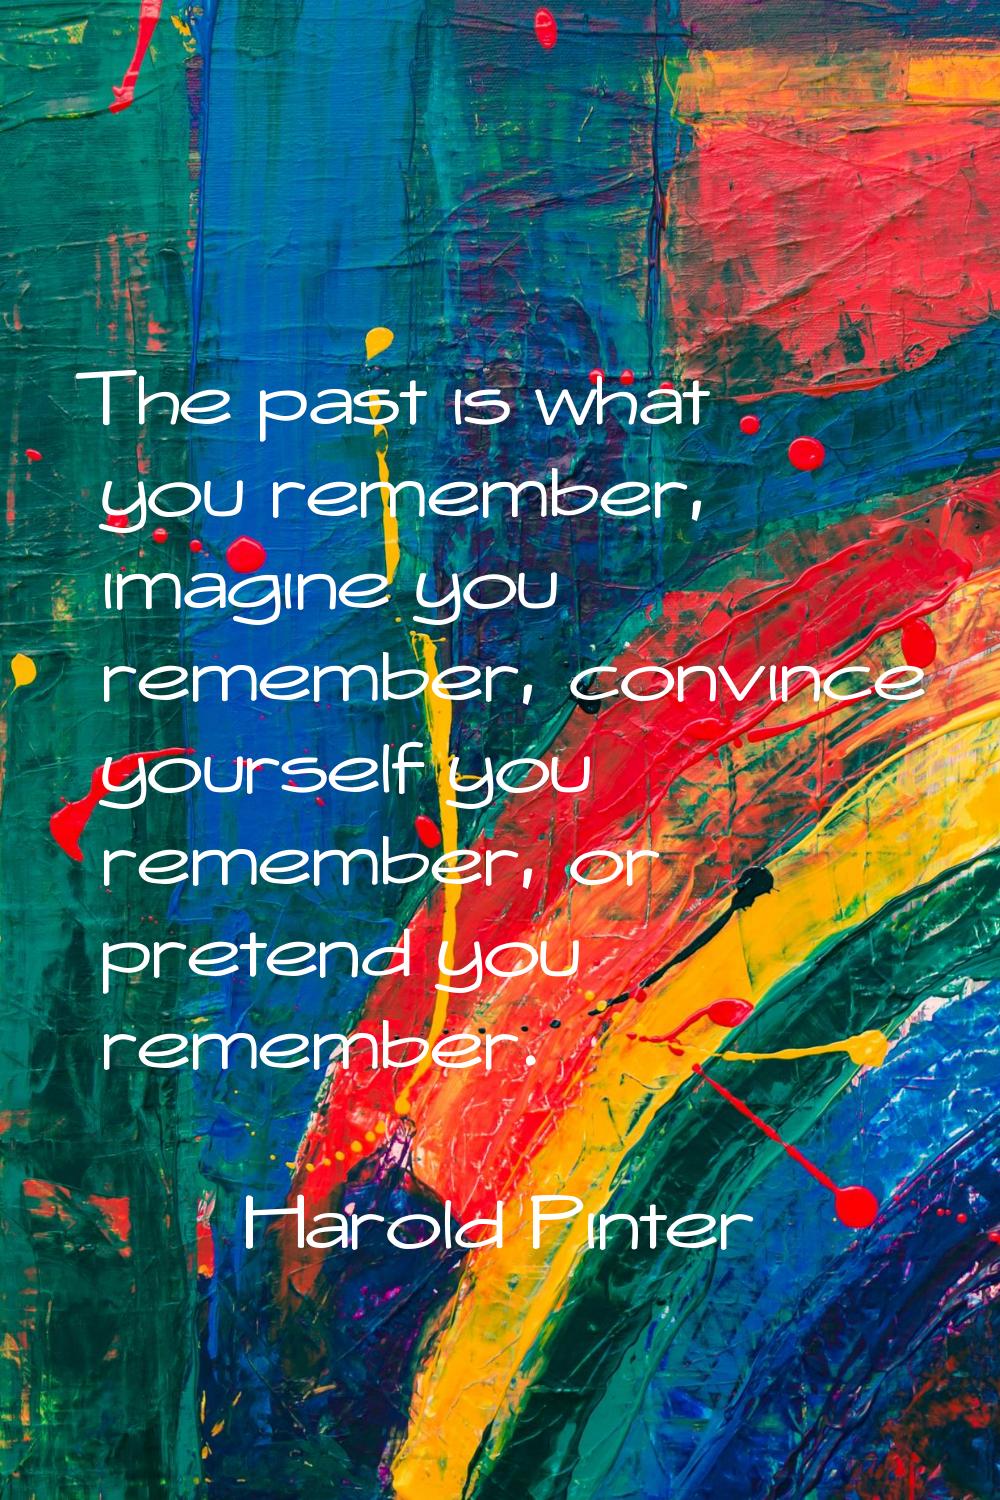 The past is what you remember, imagine you remember, convince yourself you remember, or pretend you